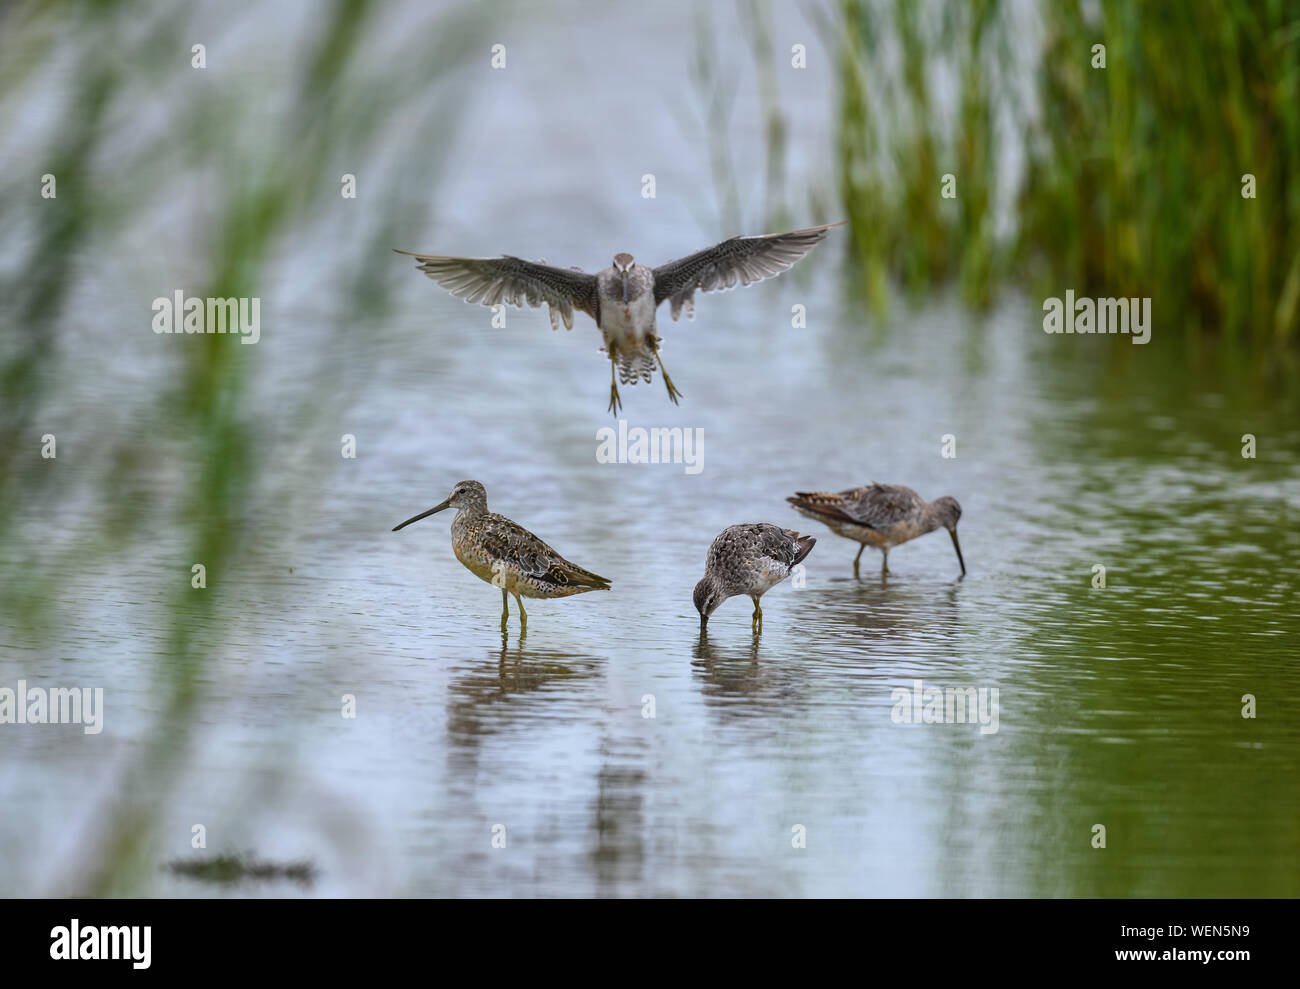 Short-billed Dowitchers (Limnodromus griseus) foraging in a shallow pond. Galveston, Texas, USA. Stock Photo